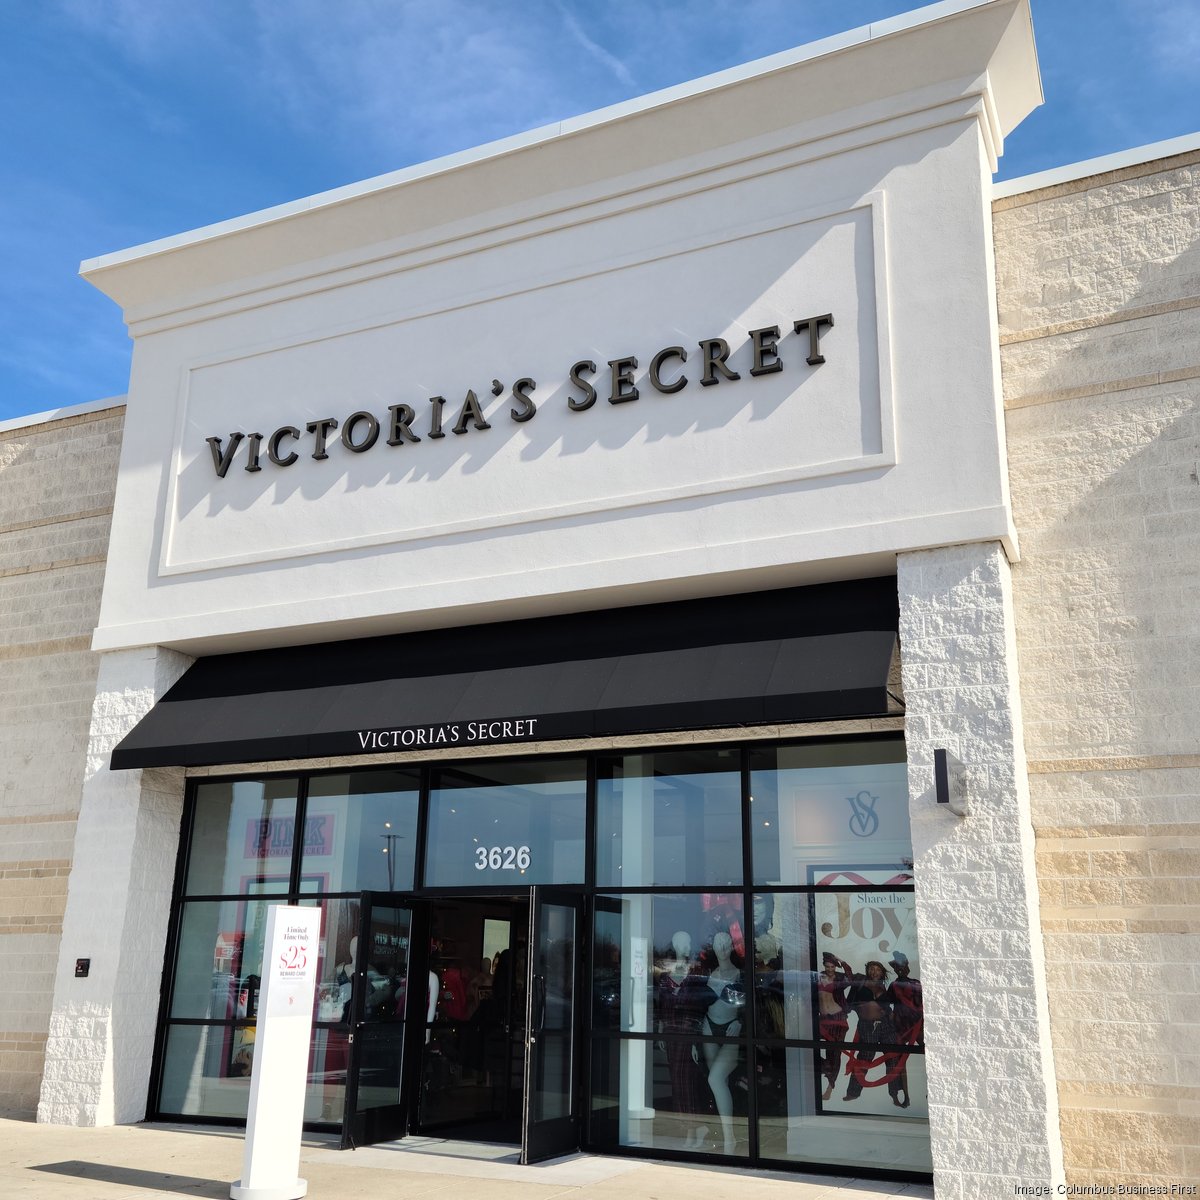 Former L Brands, Victoria's Secret call center operation in Dayton, Ohio to  close, leading to layoffs of 120 employees, company says